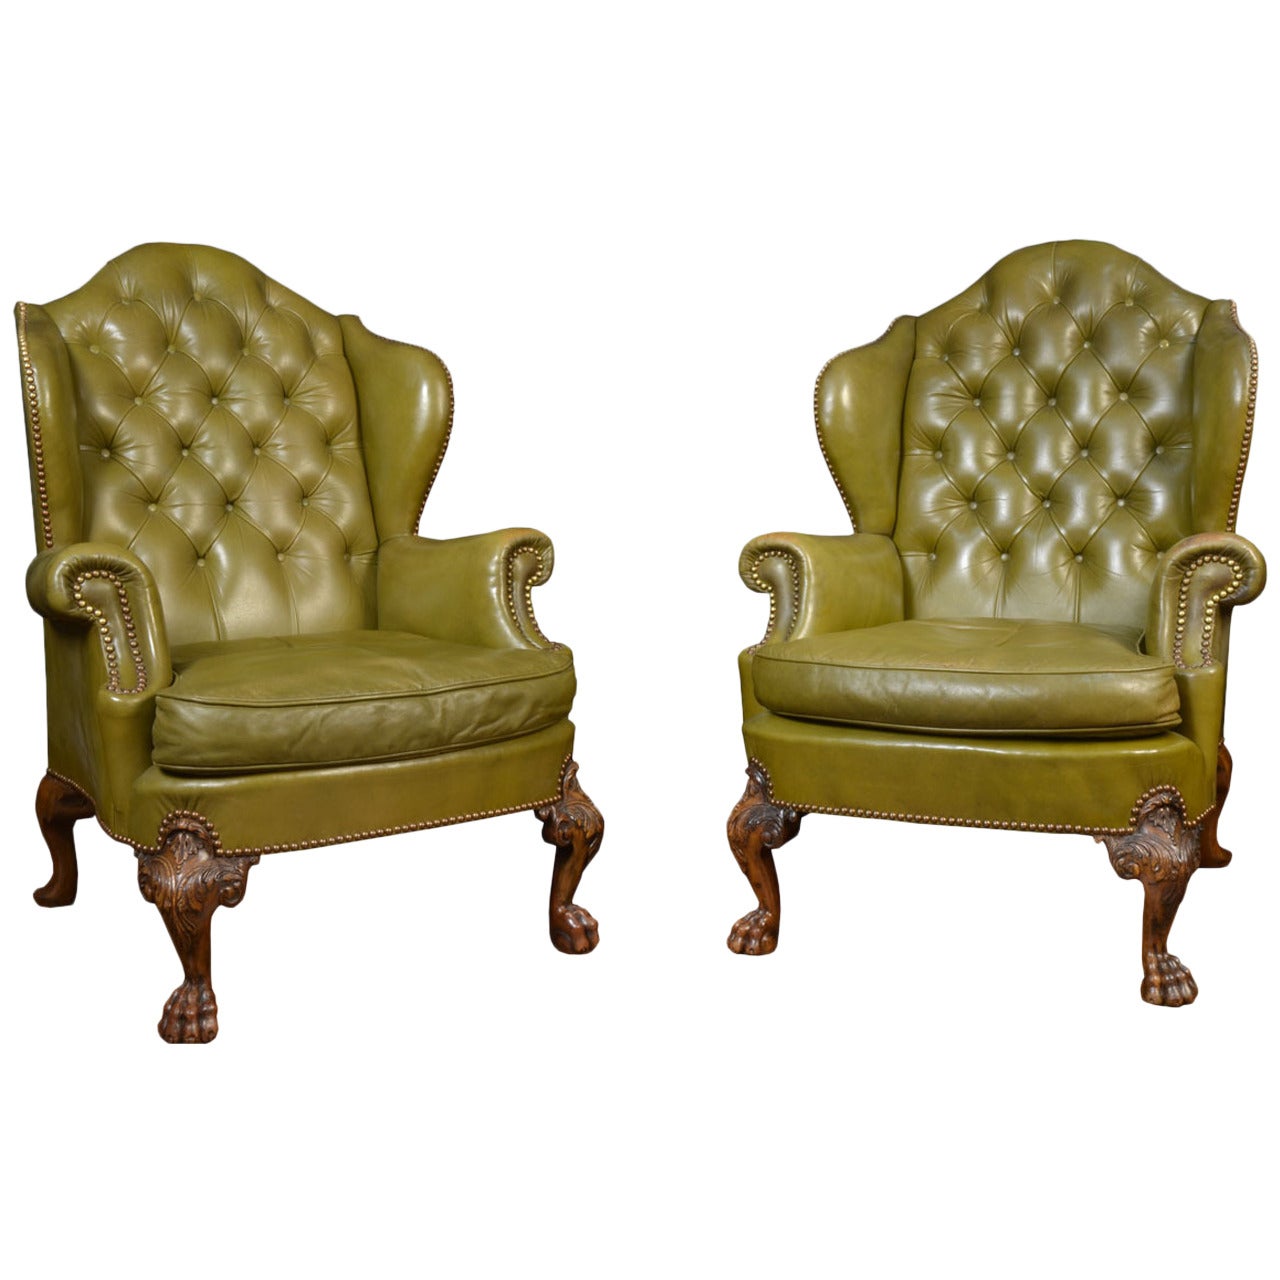 Pair of leather wing armchairs in the George II style